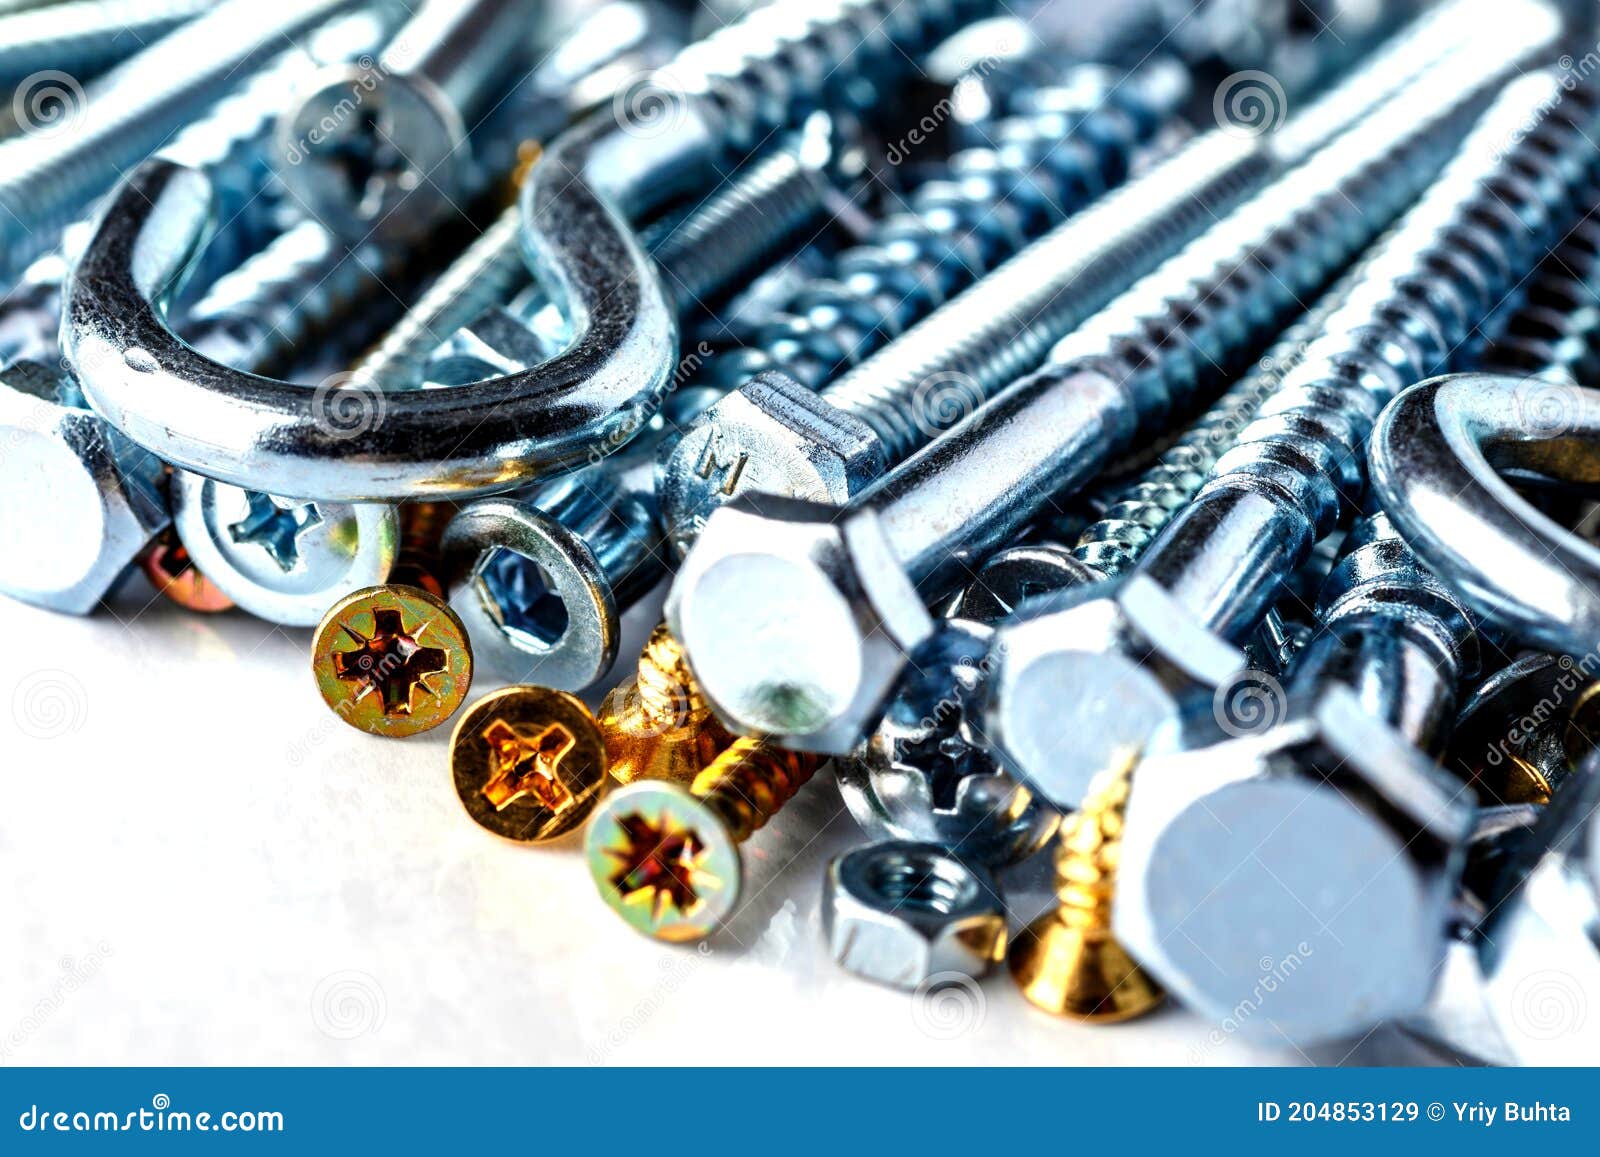 mixed screws and nails. industrial background. home improvement.bolts and nuts.close-up of various screws. use for background, top